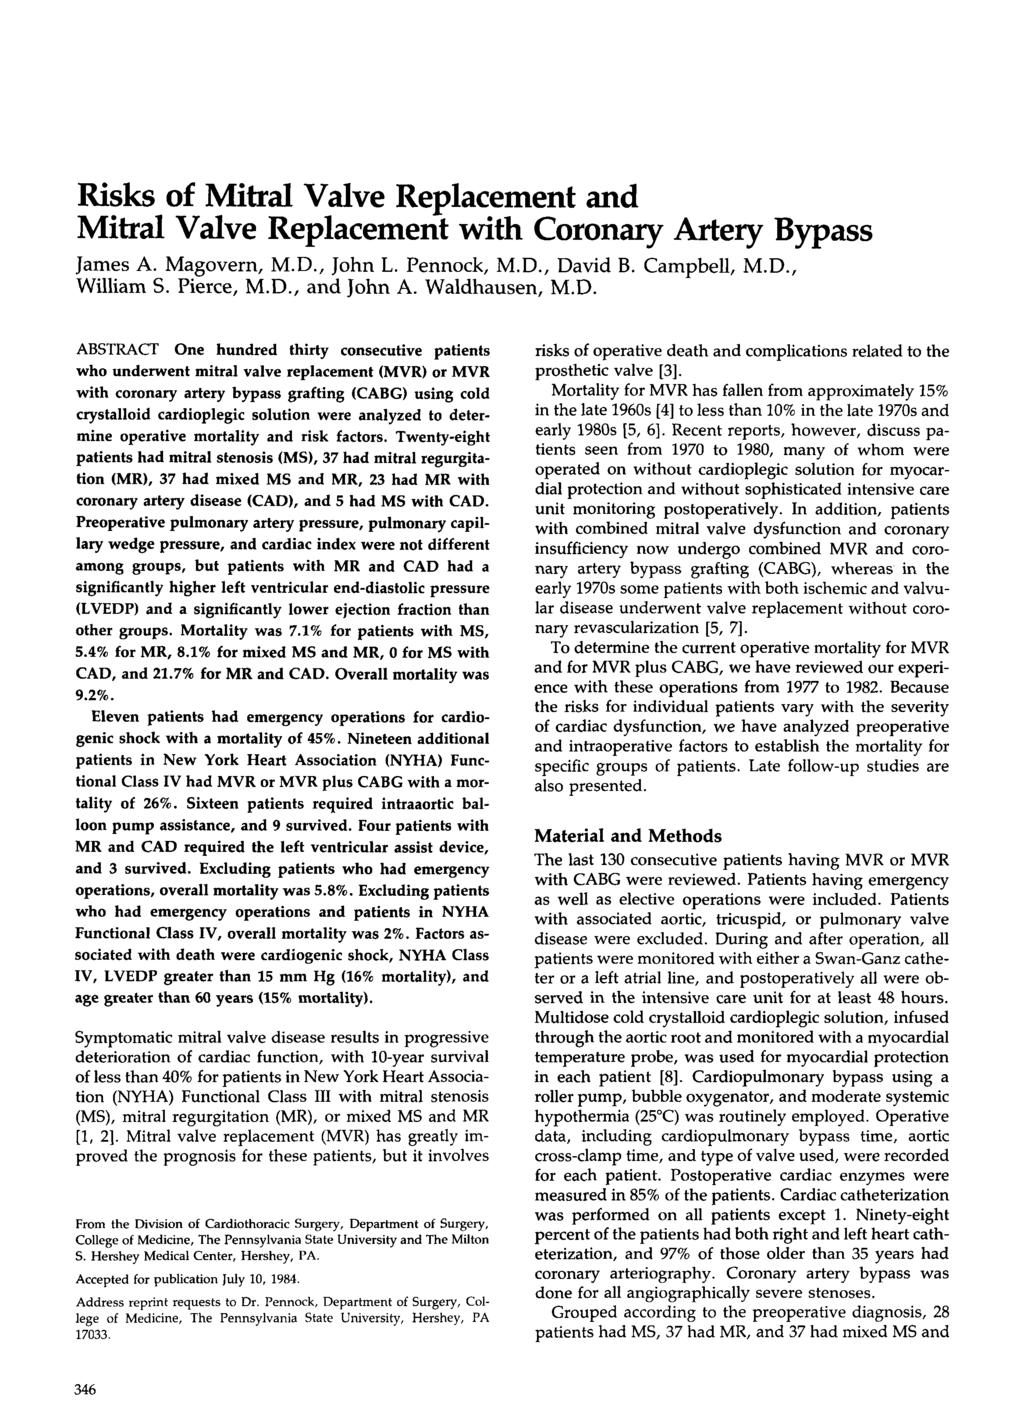 Risks of Mitral Valve Replacement and Mitral Valve Replacement with Coronary Artery Bypass James A. Magovern, M.D., John L. Pennock, M.D., David B. Campbell, M.D., William S. Pierce, M.D., and John A.